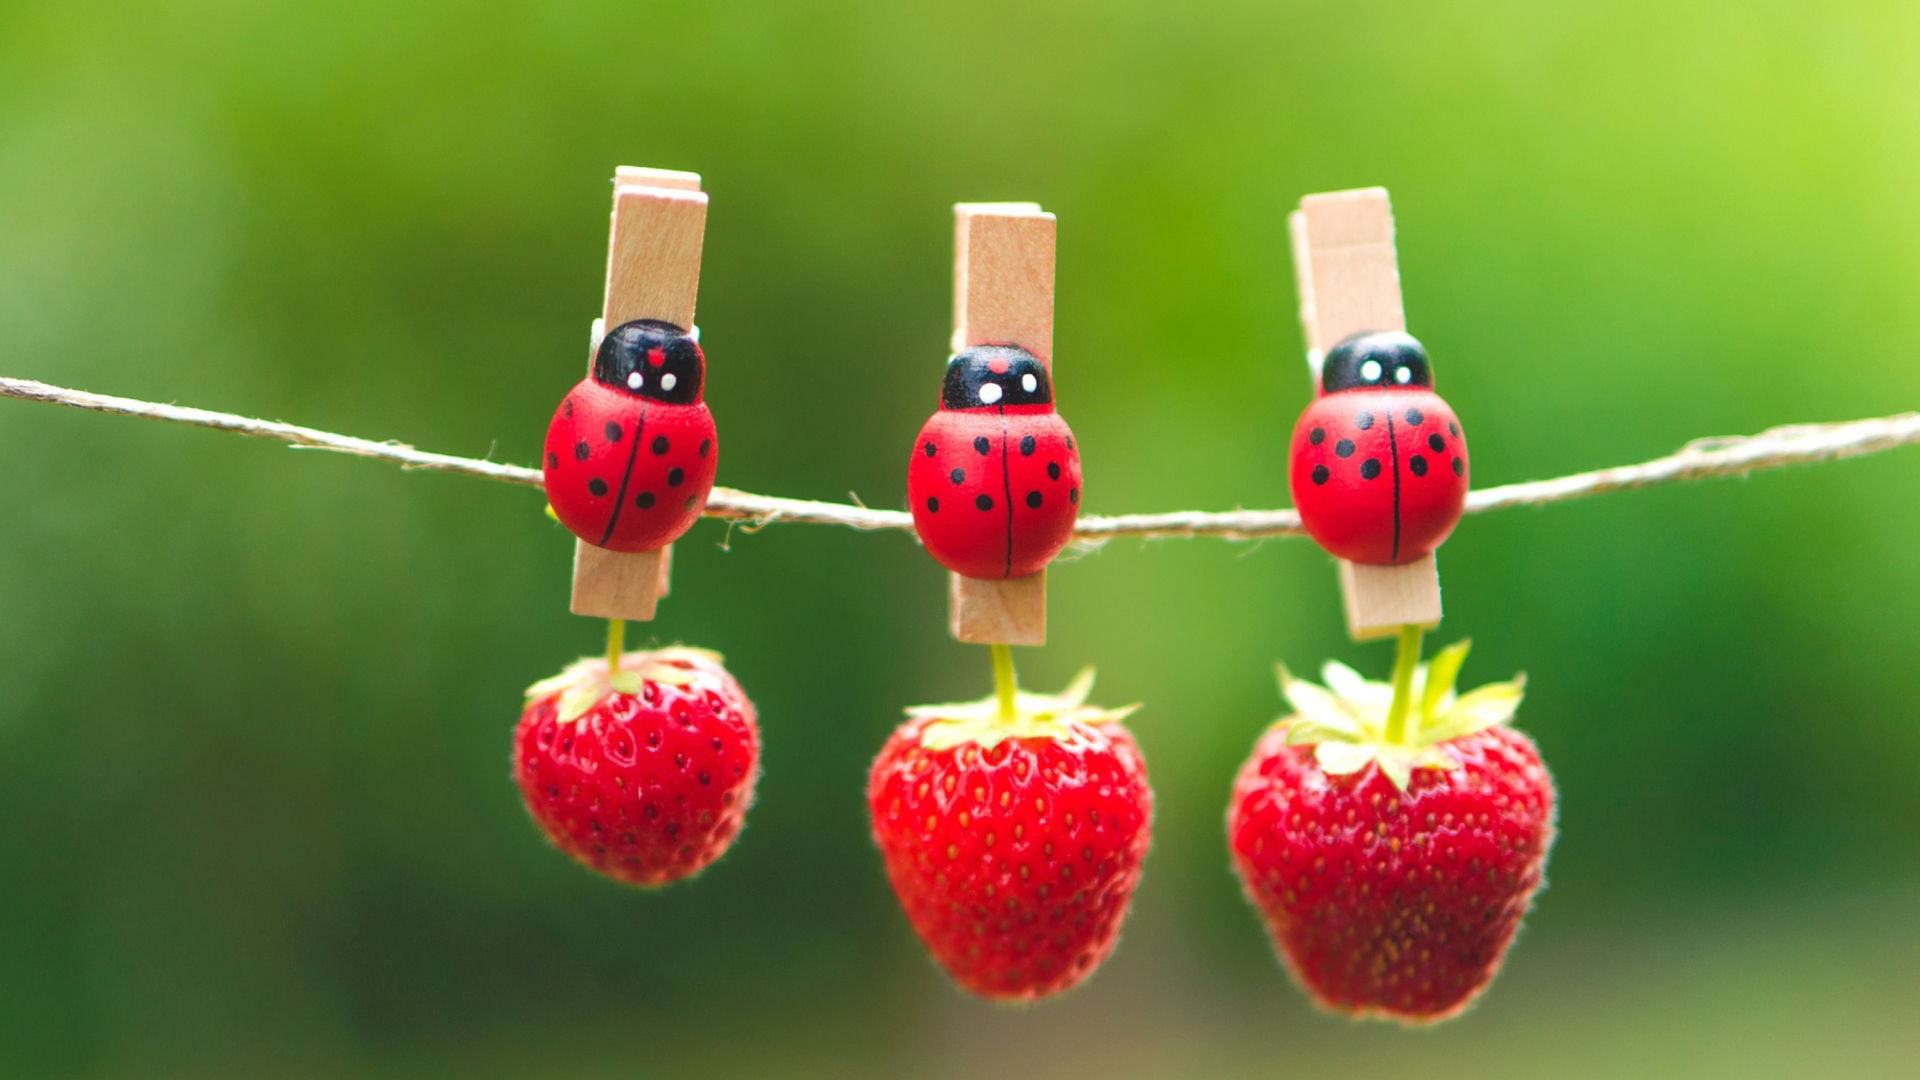 Ladybugs And Strawberries wallpaper 1920x1080